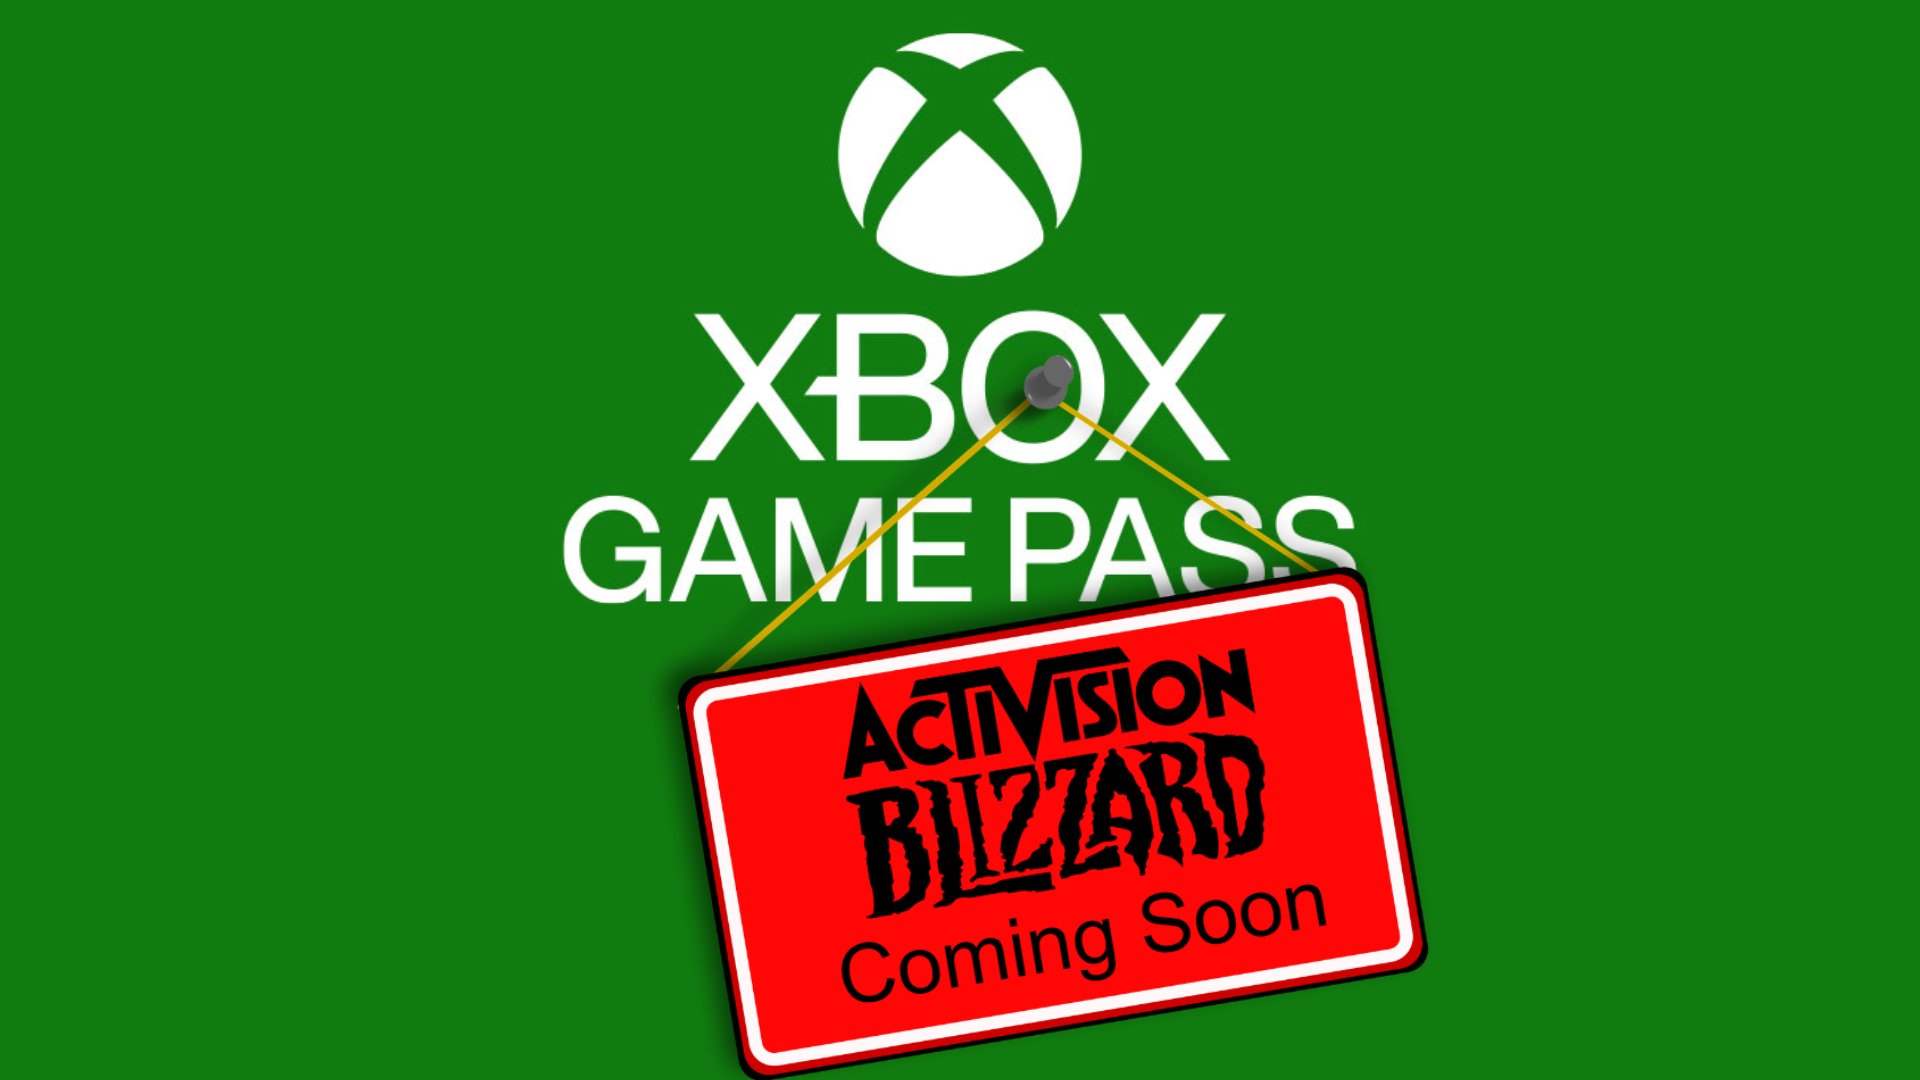 Microsoft likely won't make Activision Blizzard games exclusive to Xbox